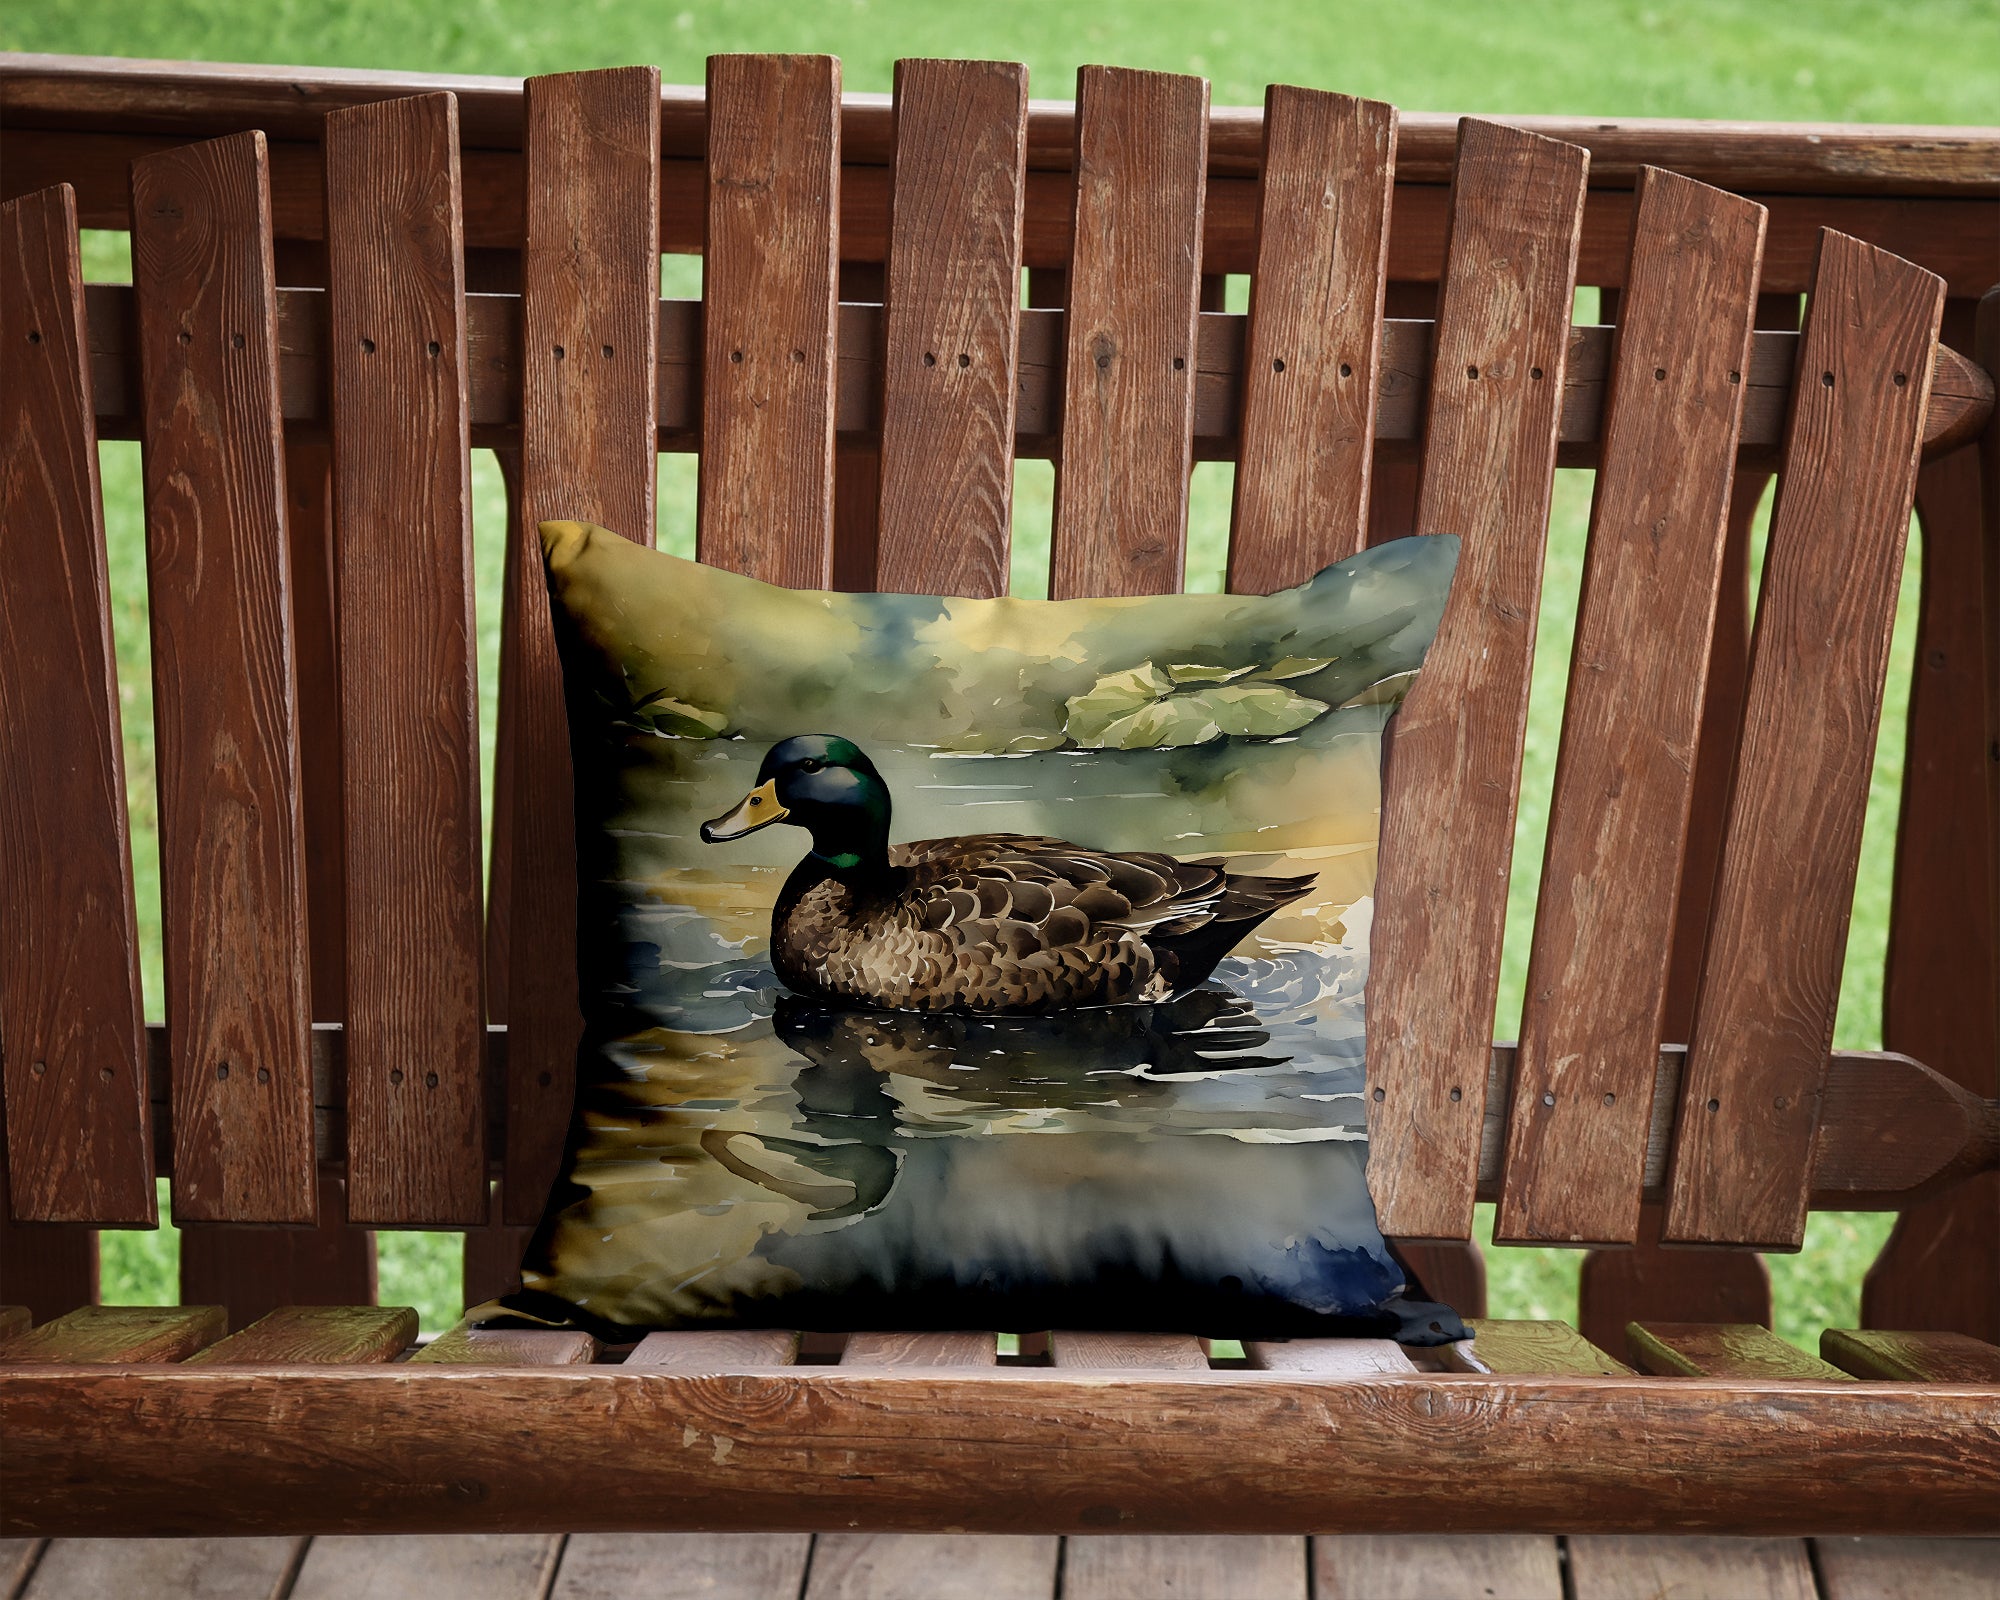 Buy this American Black Duck Throw Pillow